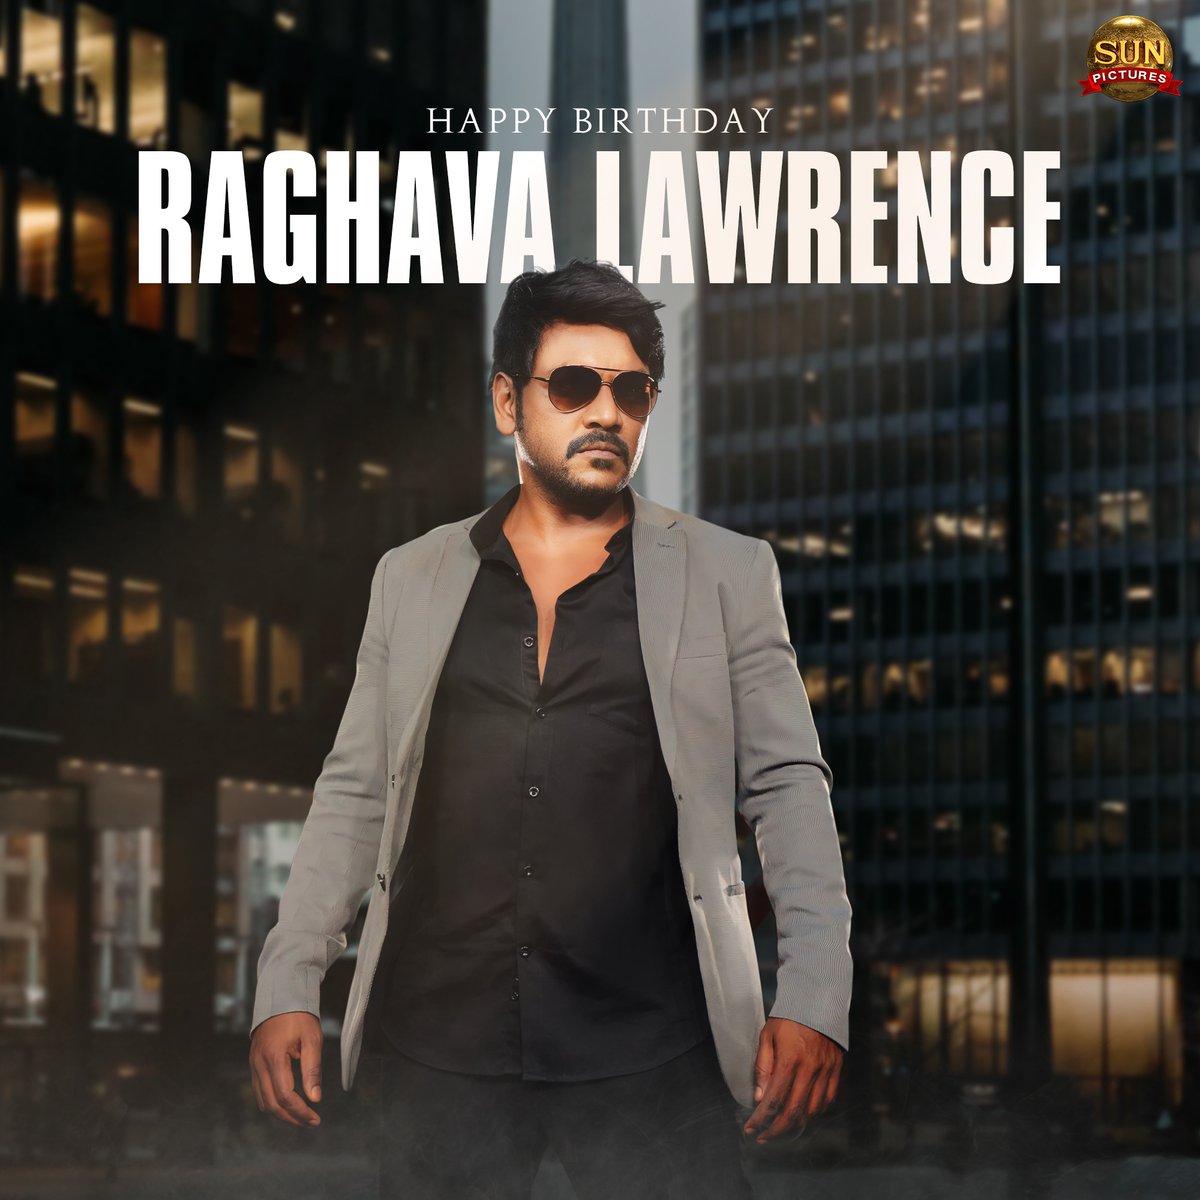 Wishing the multi-talented Director & Actor @offl_Lawrence a very happy birthday! #HBDRaghavaLawrence #HappyBirthdayRaghavaLawrence